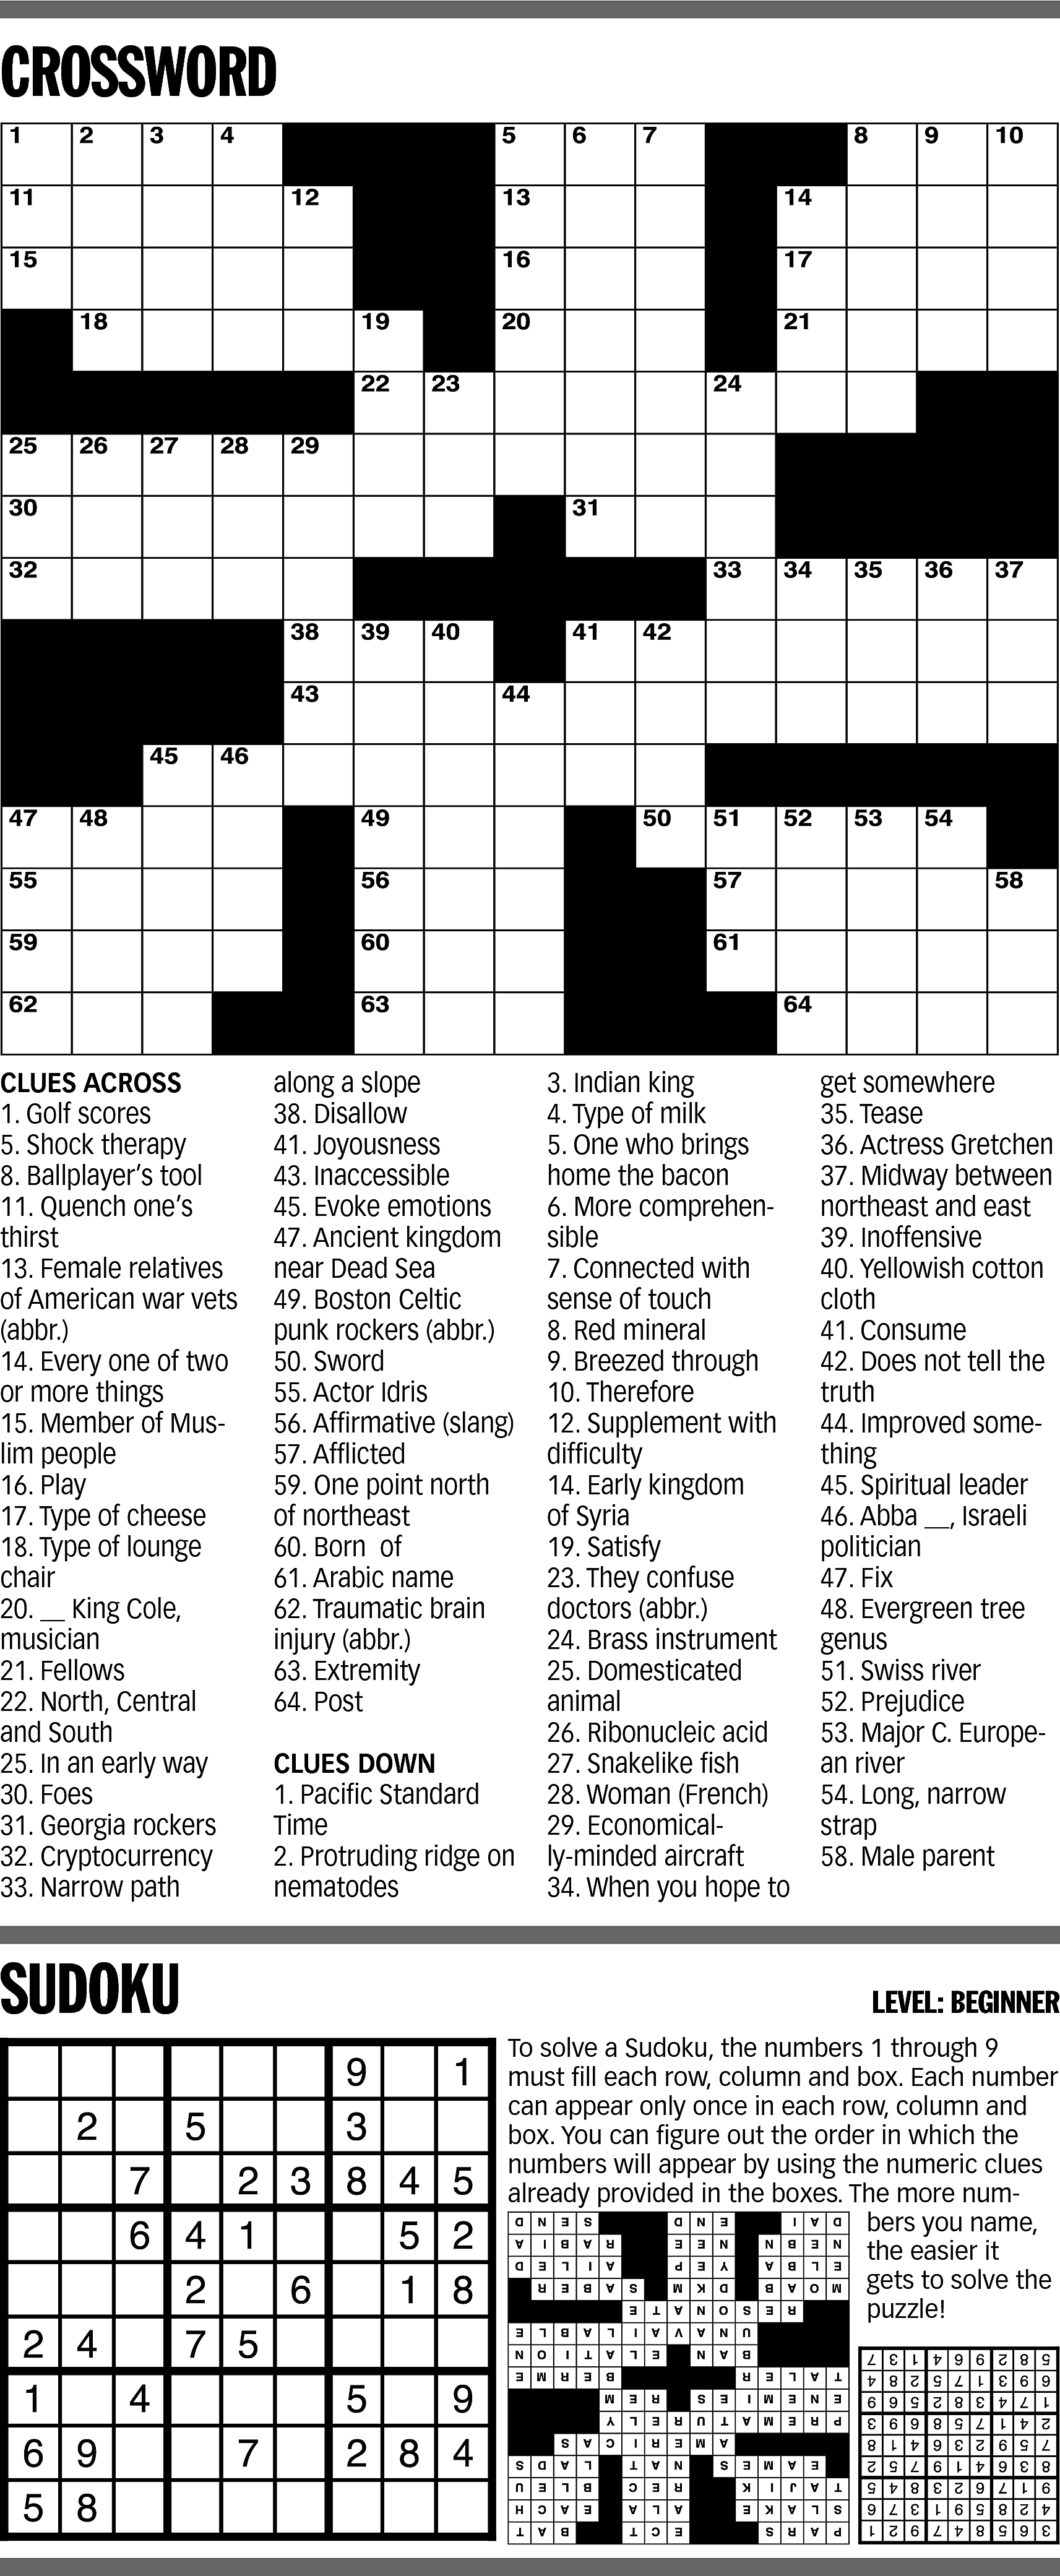 CROSSWORD <br> <br>CLUES ACROSS <br>1.  CROSSWORD    CLUES ACROSS  1. Golf scores  5. Shock therapy  8. Ballplayer’s tool  11. Quench one’s  thirst  13. Female relatives  of American war vets  (abbr.)  14. Every one of two  or more things  15. Member of Muslim people  16. Play  17. Type of cheese  18. Type of lounge  chair  20. __ King Cole,  musician  21. Fellows  22. North, Central  and South  25. In an early way  30. Foes  31. Georgia rockers  32. Cryptocurrency  33. Narrow path    SUDOKU    along a slope  38. Disallow  41. Joyousness  43. Inaccessible  45. Evoke emotions  47. Ancient kingdom  near Dead Sea  49. Boston Celtic  punk rockers (abbr.)  50. Sword  55. Actor Idris  56. Affirmative (slang)  57. Afflicted  59. One point north  of northeast  60. Born of  61. Arabic name  62. Traumatic brain  injury (abbr.)  63. Extremity  64. Post  CLUES DOWN  1. Pacific Standard  Time  2. Protruding ridge on  nematodes    3. Indian king  4. Type of milk  5. One who brings  home the bacon  6. More comprehensible  7. Connected with  sense of touch  8. Red mineral  9. Breezed through  10. Therefore  12. Supplement with  difficulty  14. Early kingdom  of Syria  19. Satisfy  23. They confuse  doctors (abbr.)  24. Brass instrument  25. Domesticated  animal  26. Ribonucleic acid  27. Snakelike fish  28. Woman (French)  29. Economically-minded aircraft  34. When you hope to    get somewhere  35. Tease  36. Actress Gretchen  37. Midway between  northeast and east  39. Inoffensive  40. Yellowish cotton  cloth  41. Consume  42. Does not tell the  truth  44. Improved something  45. Spiritual leader  46. Abba __, Israeli  politician  47. Fix  48. Evergreen tree  genus  51. Swiss river  52. Prejudice  53. Major C. European river  54. Long, narrow  strap  58. Male parent    LEVEL: BEGINNER  To solve a Sudoku, the numbers 1 through 9  must fill each row, column and box. Each number  can appear only once in each row, column and  box. You can figure out the order in which the  numbers will appear by using the numeric clues  already provided in the boxes. The more numbers you name,  the easier it  gets to solve the  puzzle!    